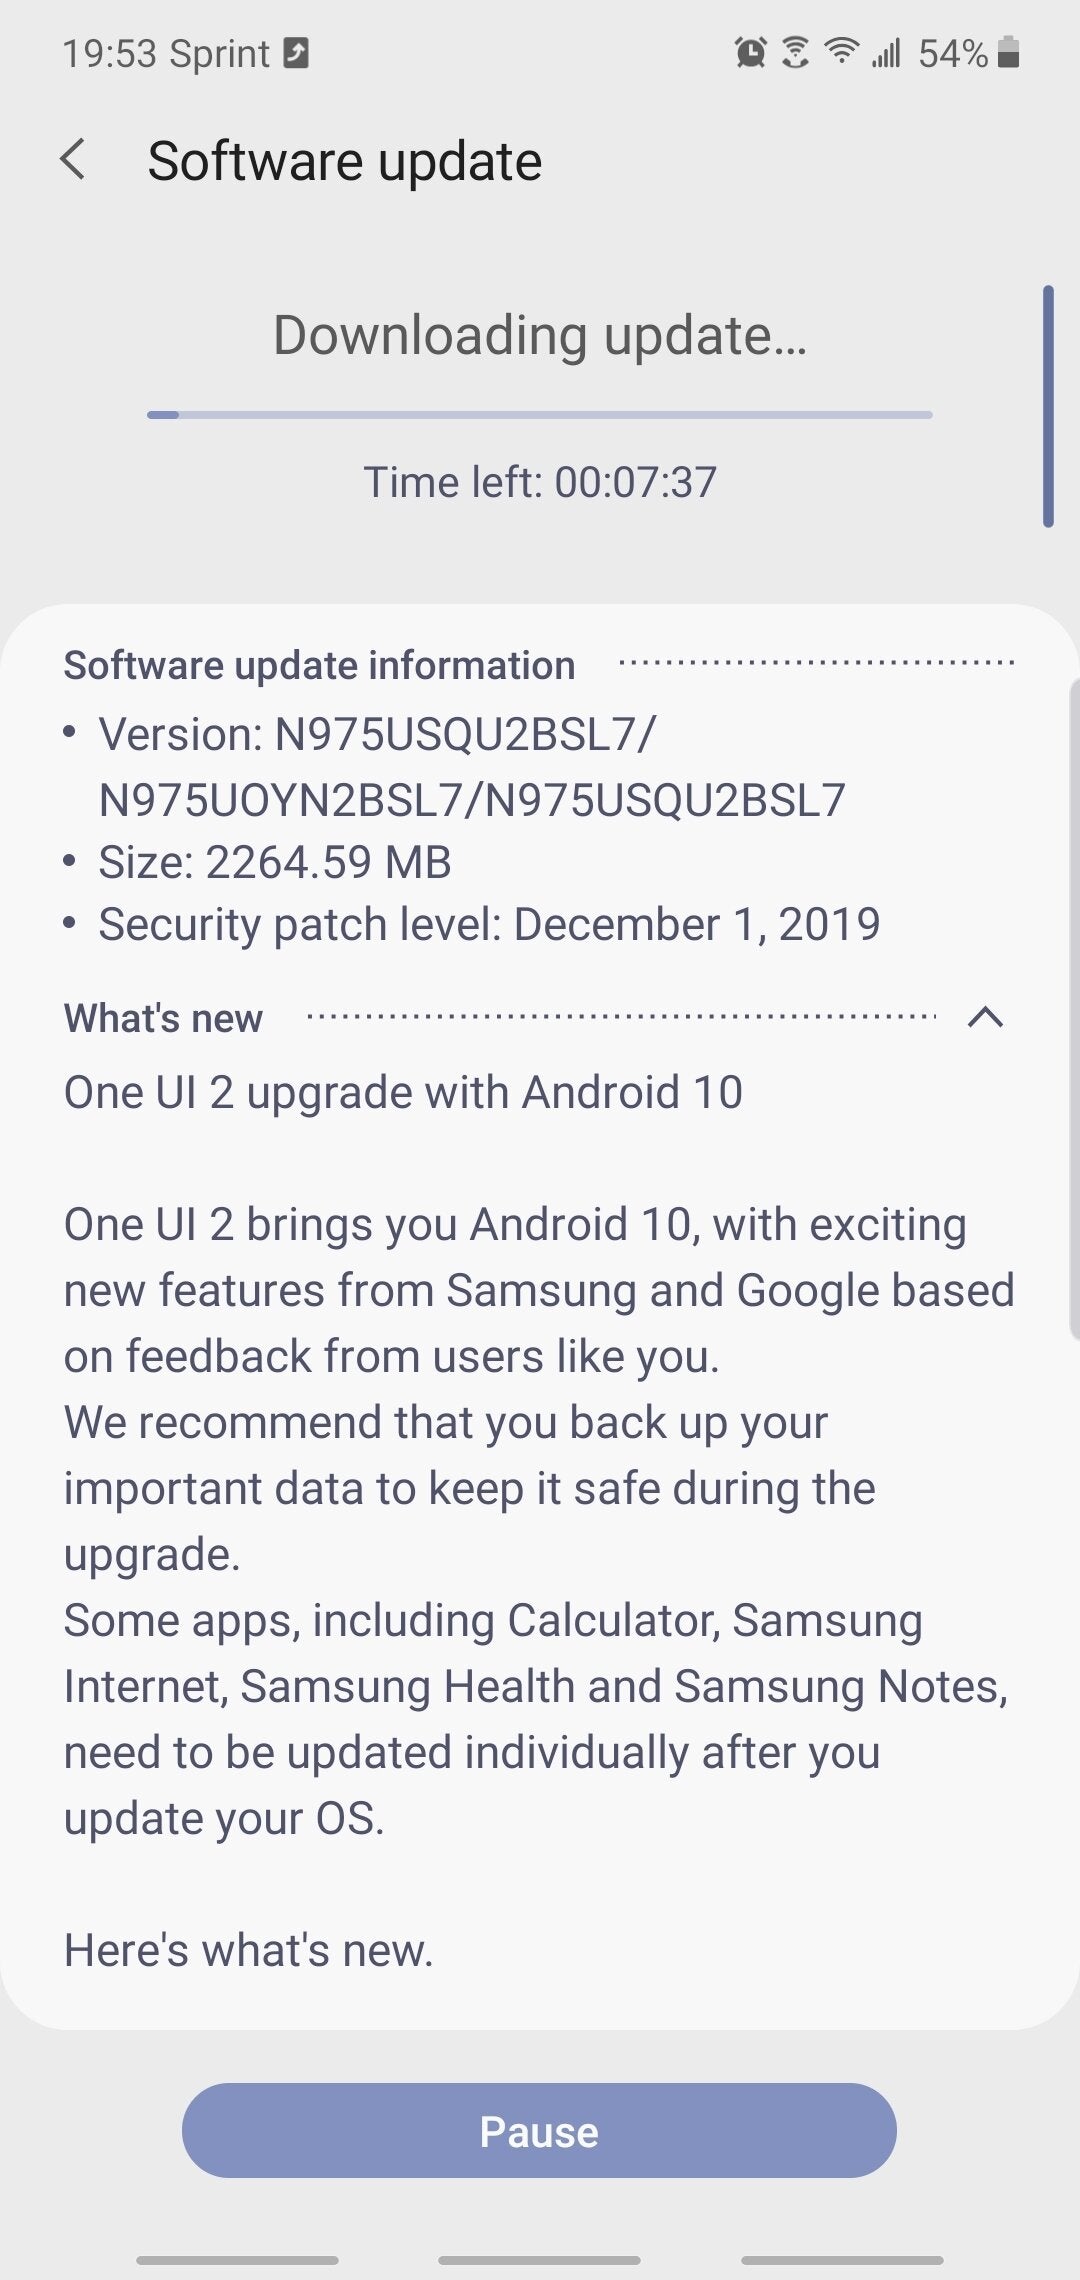 Android 10 update for Sprint Galaxy Note 10 - Sprint rolls out Android 10 update for Samsung Galaxy Note 10 and Note 10+